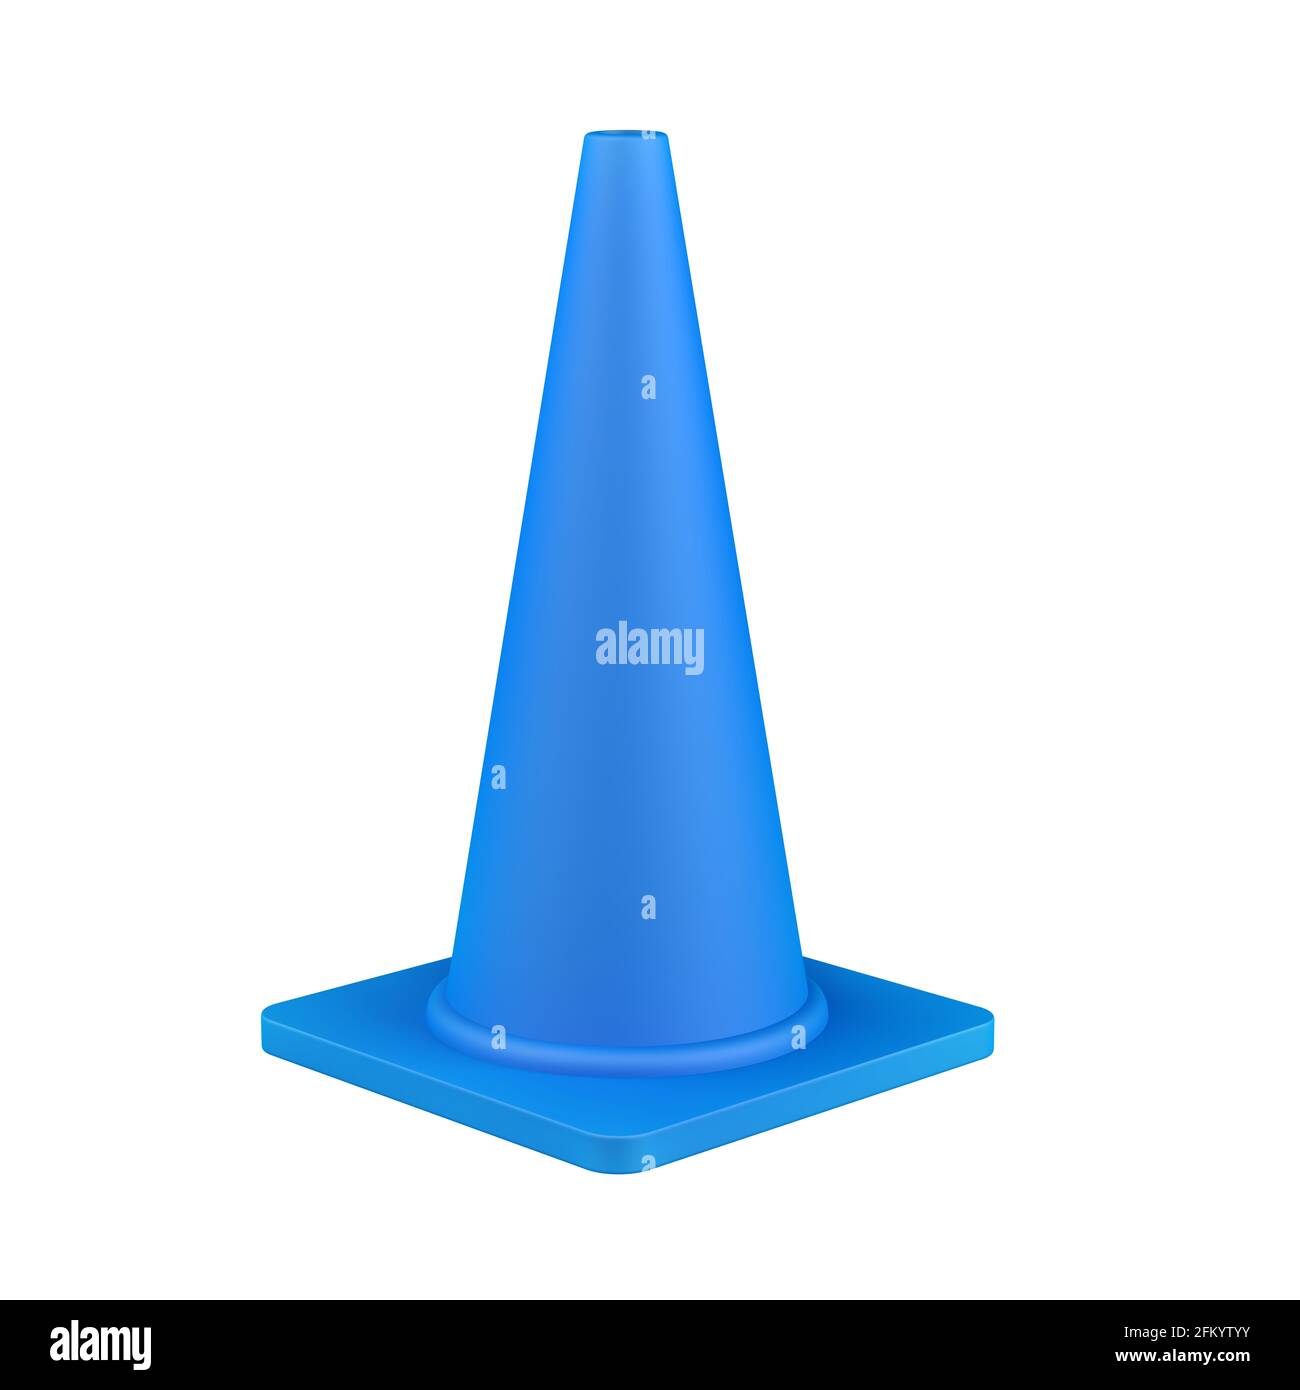 Blue traffic cone isolated on white background. Cone-shaped markers. 3d illustration. Stock Photo